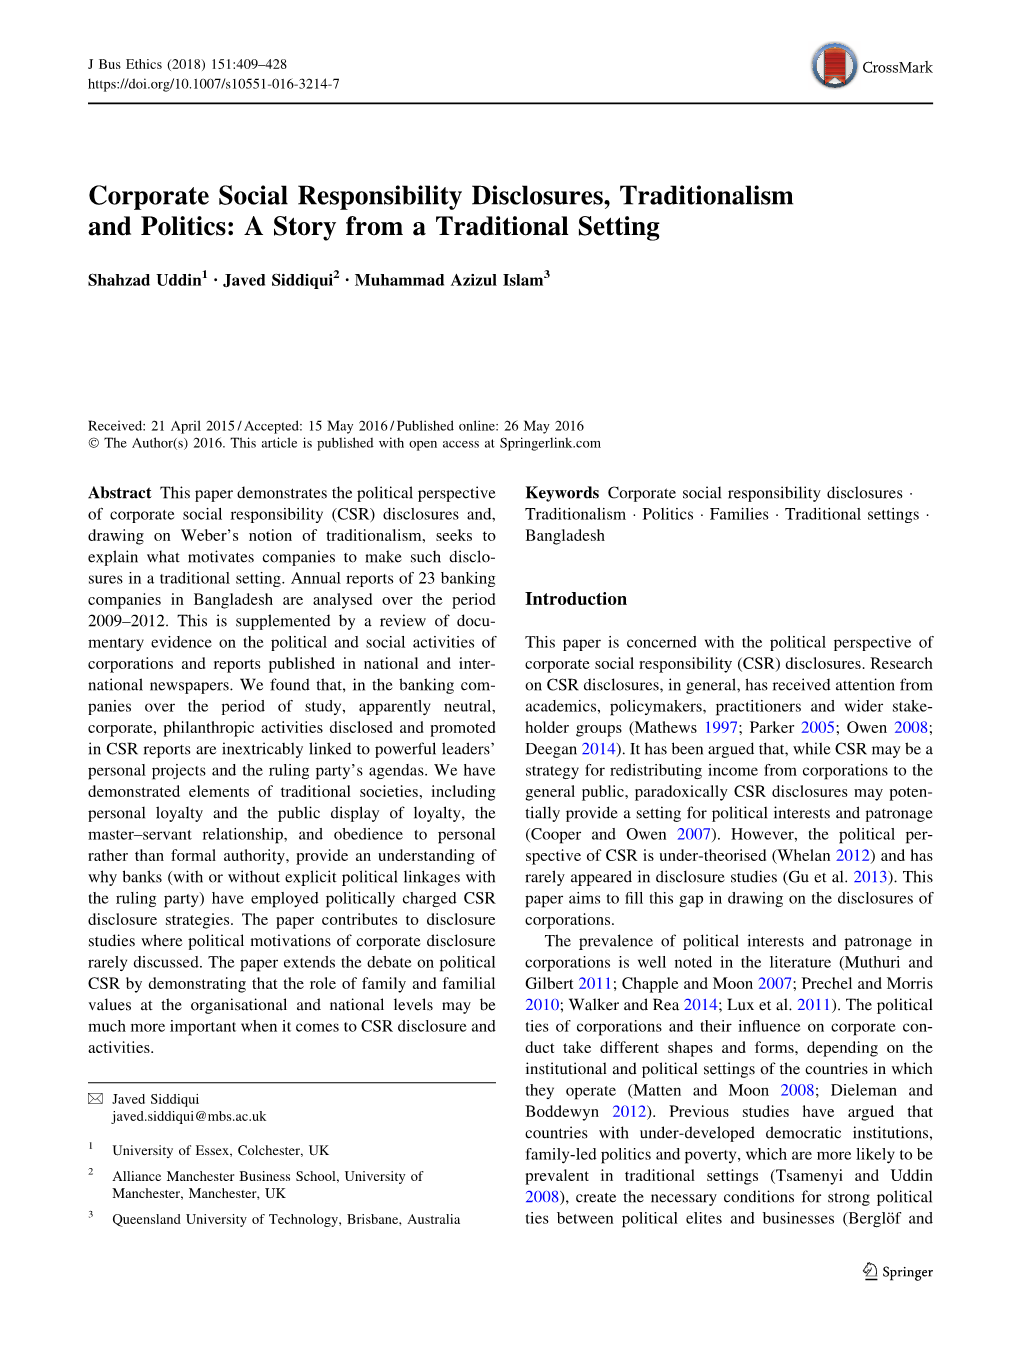 Corporate Social Responsibility Disclosures, Traditionalism and Politics: a Story from a Traditional Setting